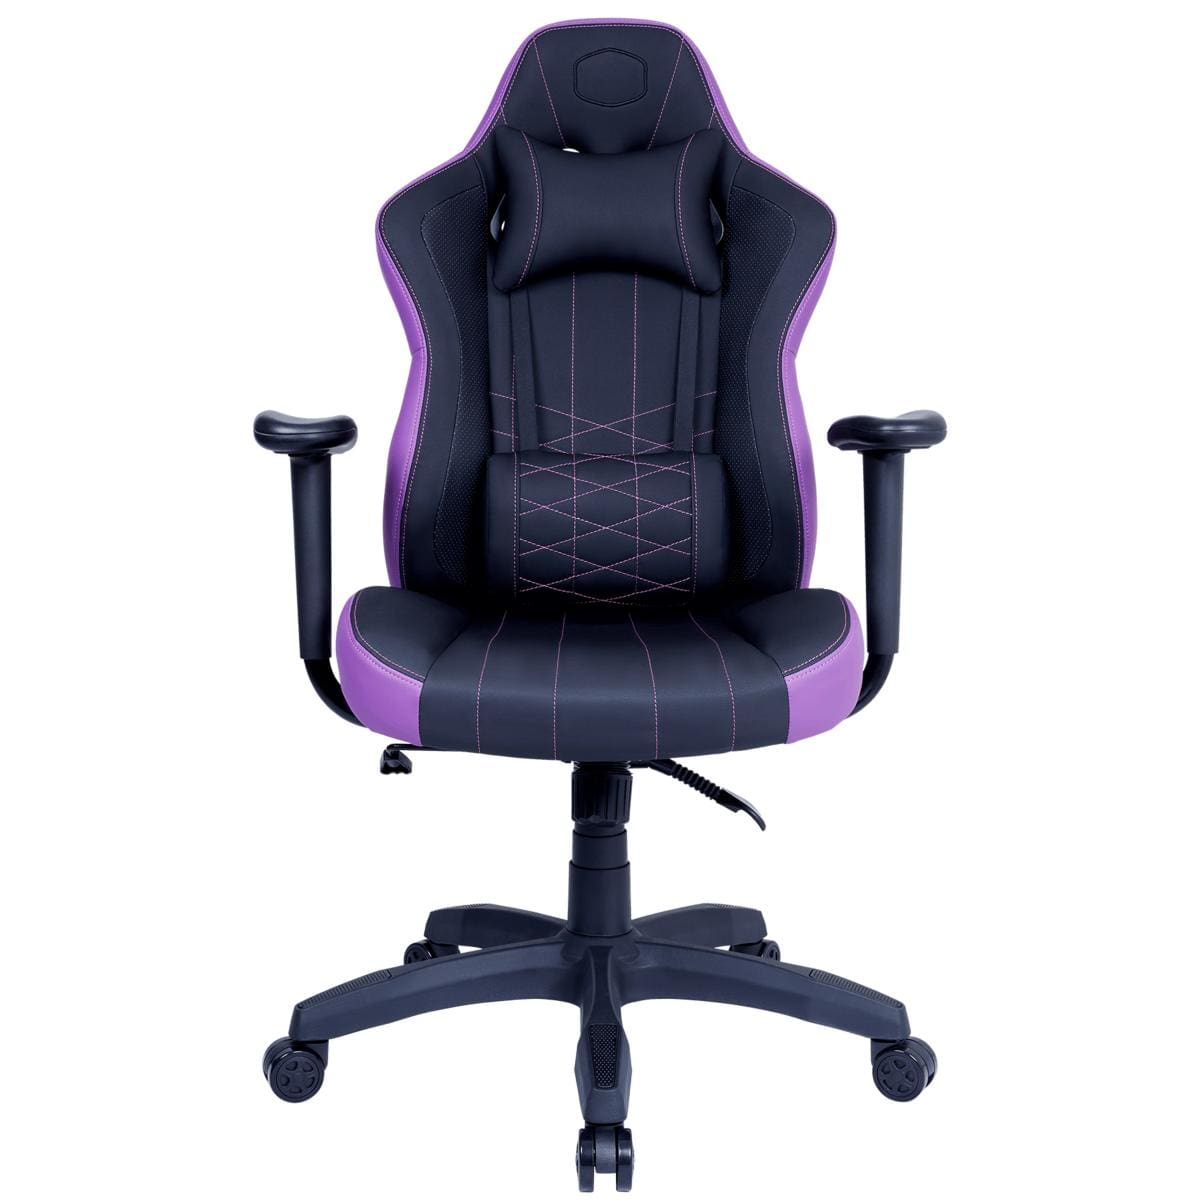 COOLER MASTER Gaming Chairs Cooler Master Caliber E1 Gaming Chair (Purple), Up to 120KG Max Weight Load